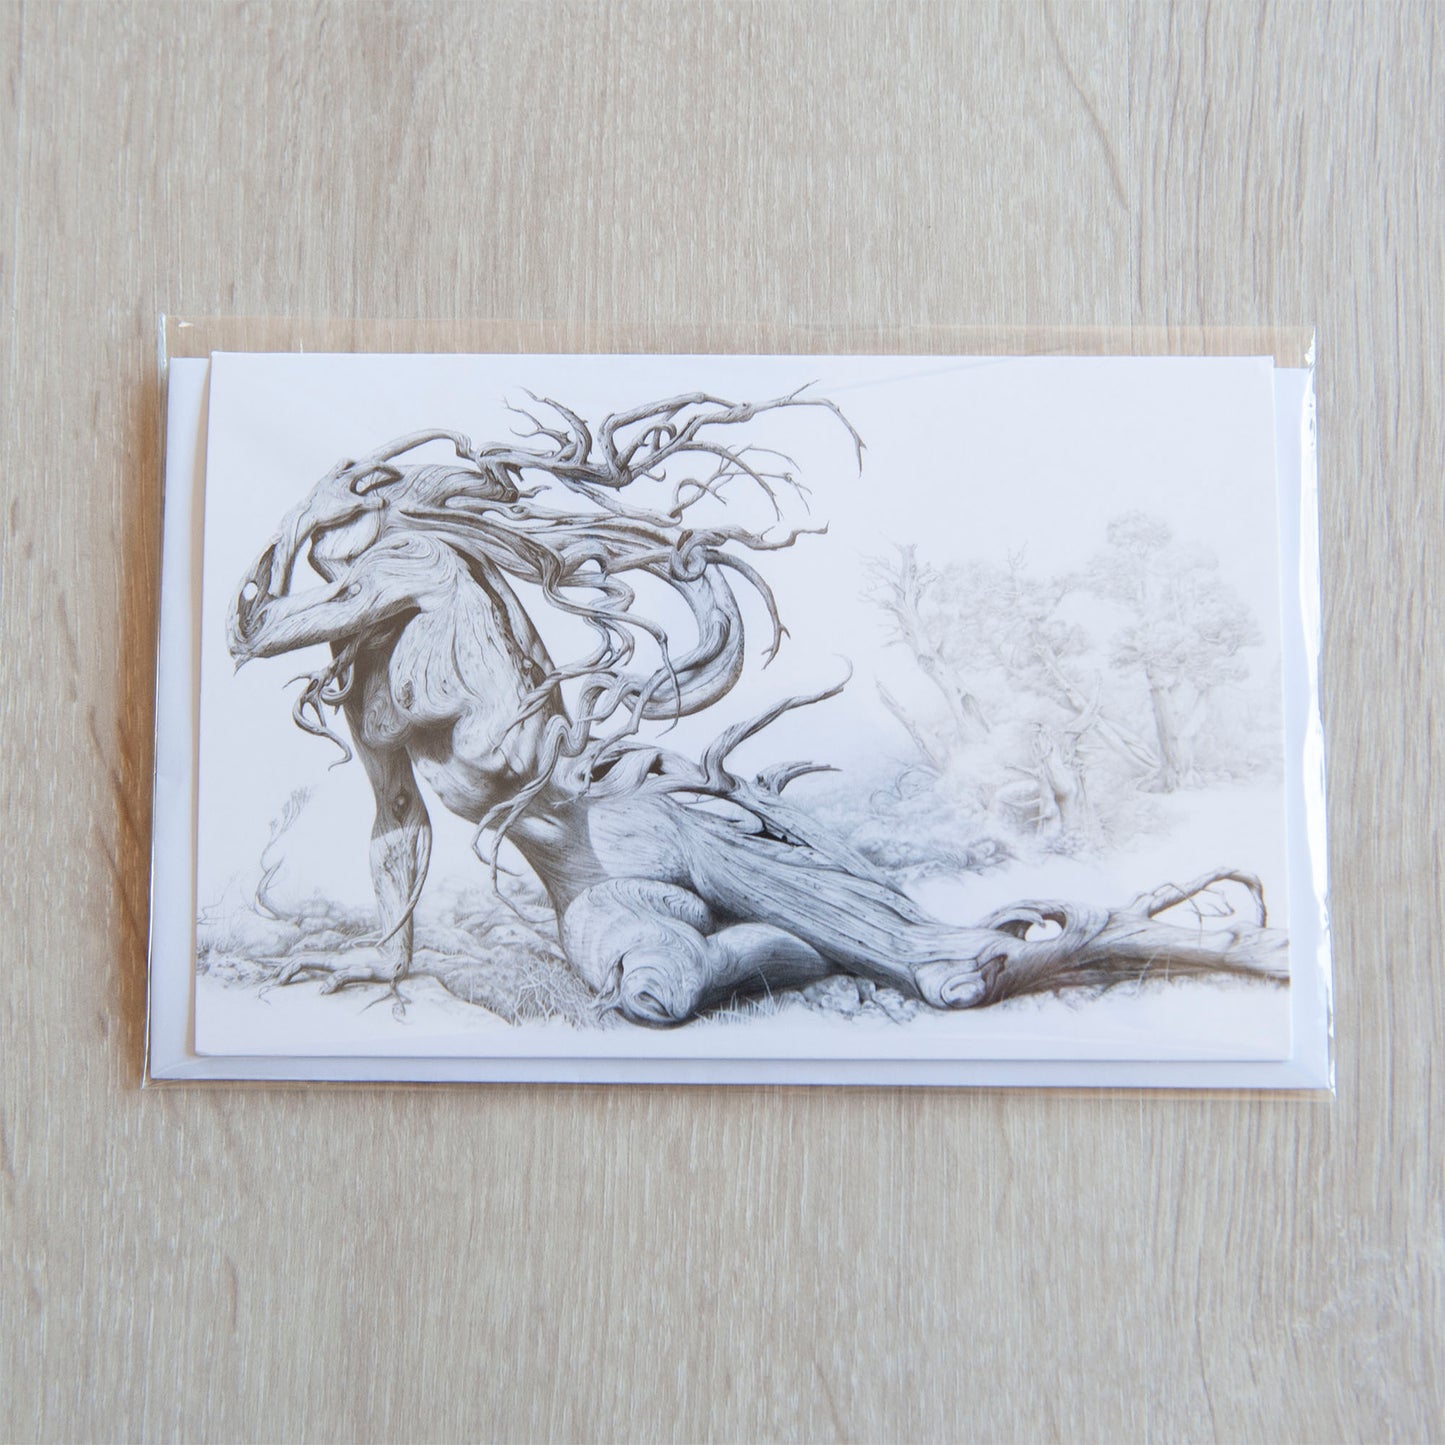 'The Fallen' greeting card